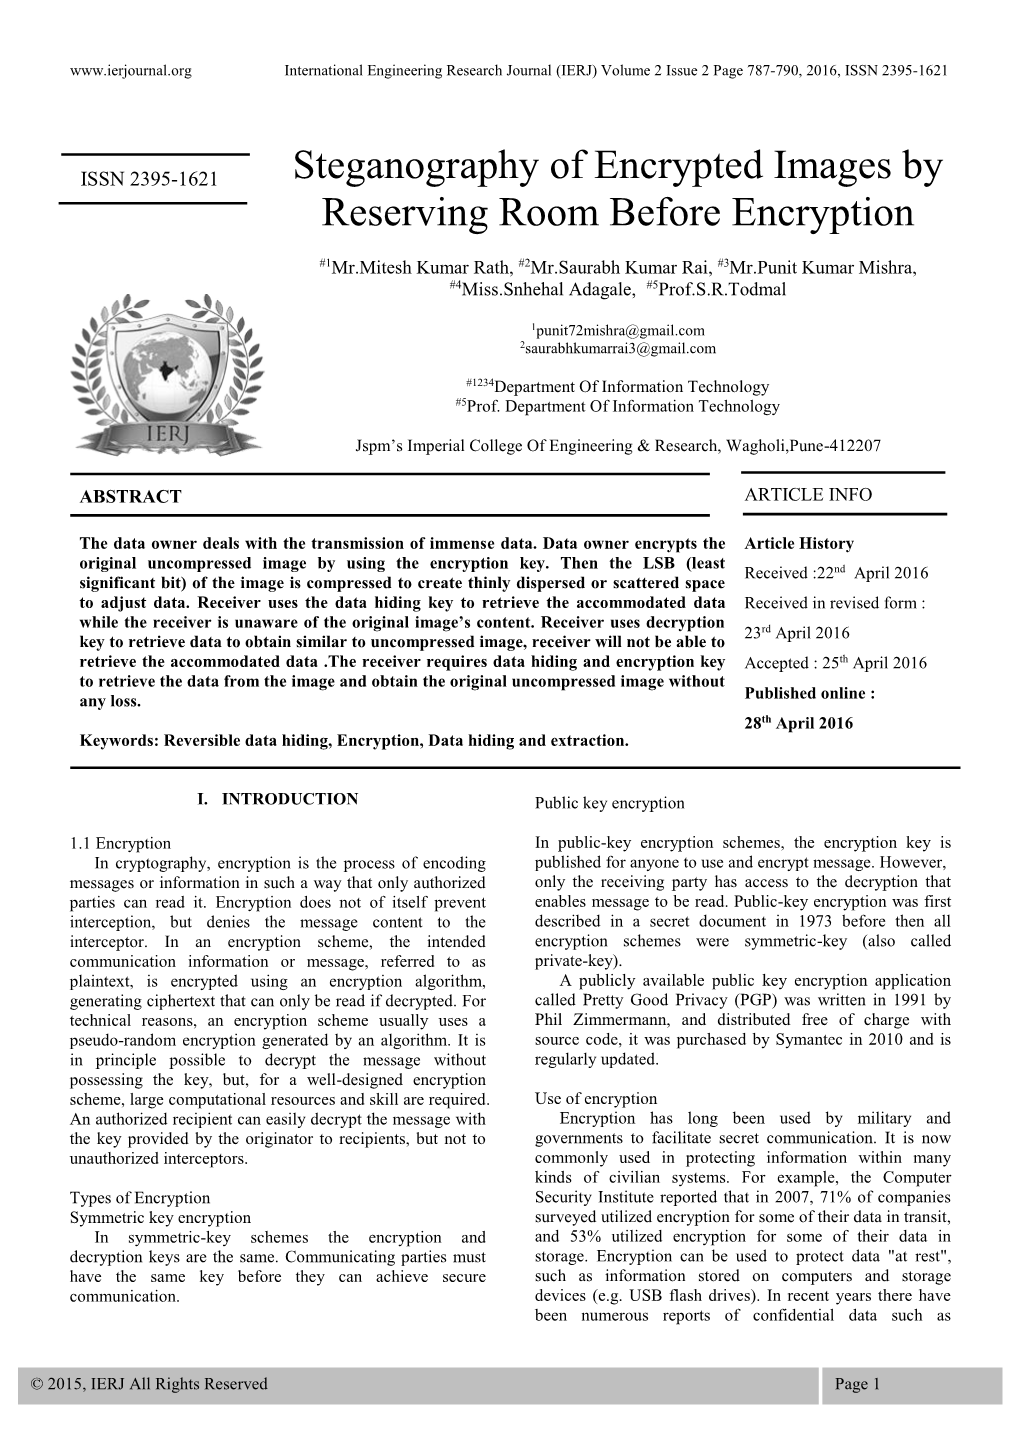 Steganography of Encrypted Images by Reserving Room Before Encryption